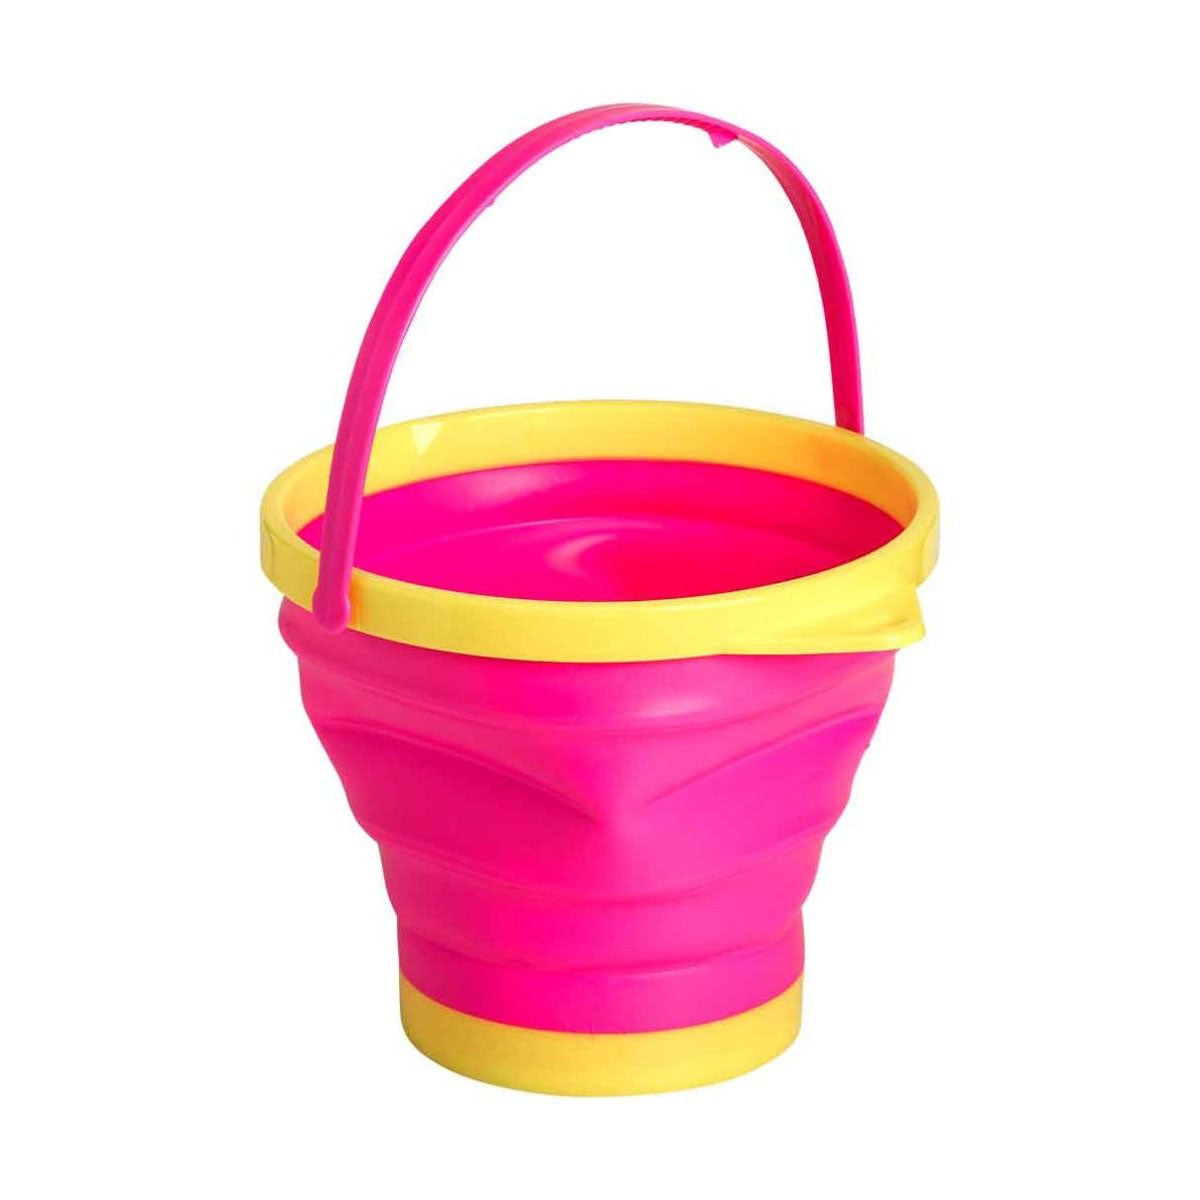 pink bucket and spade